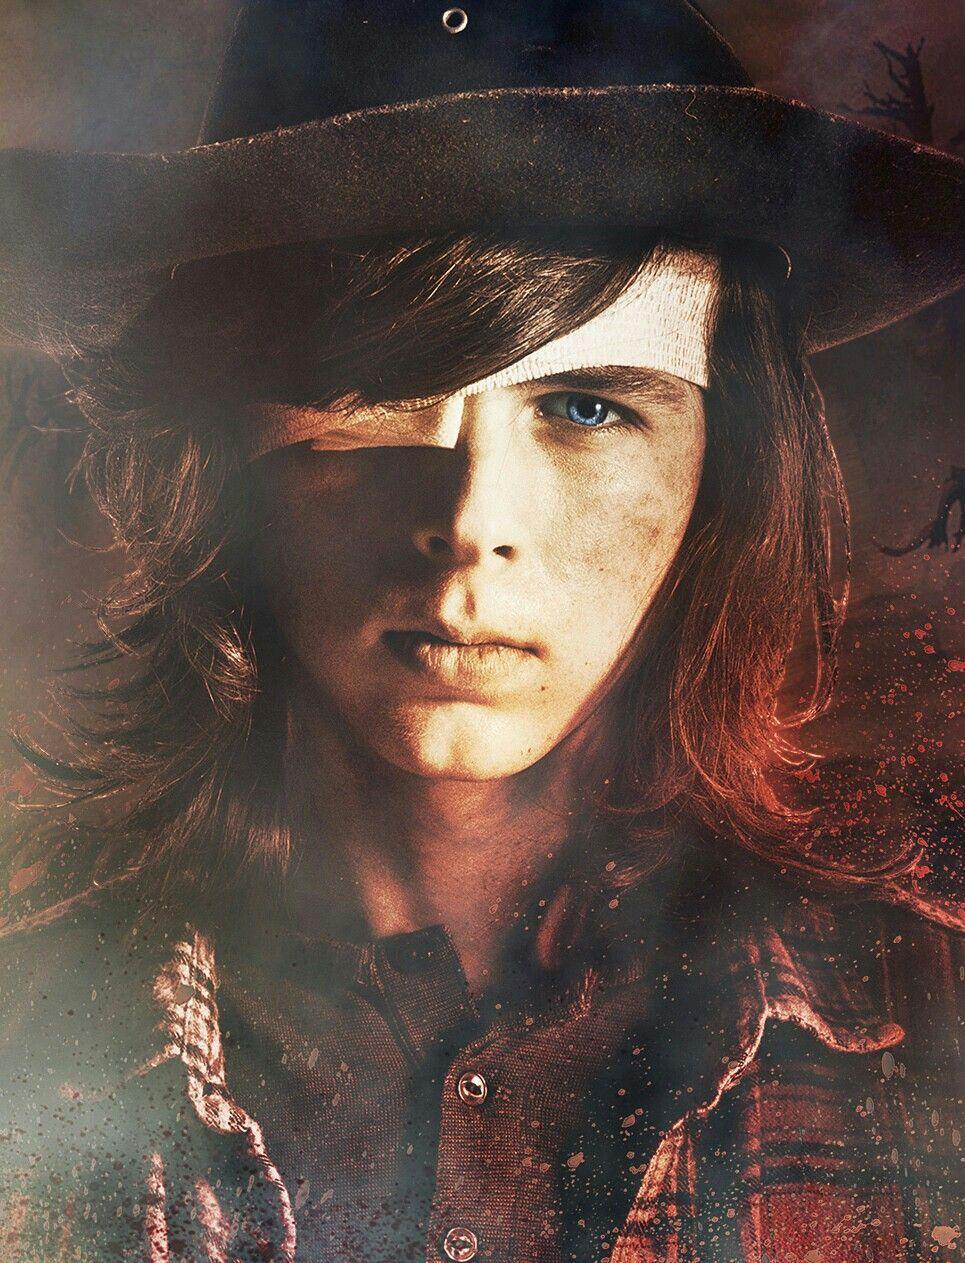 Carl Grimes Wallpapers - Top Free Carl Grimes Backgrounds - WallpaperAccess